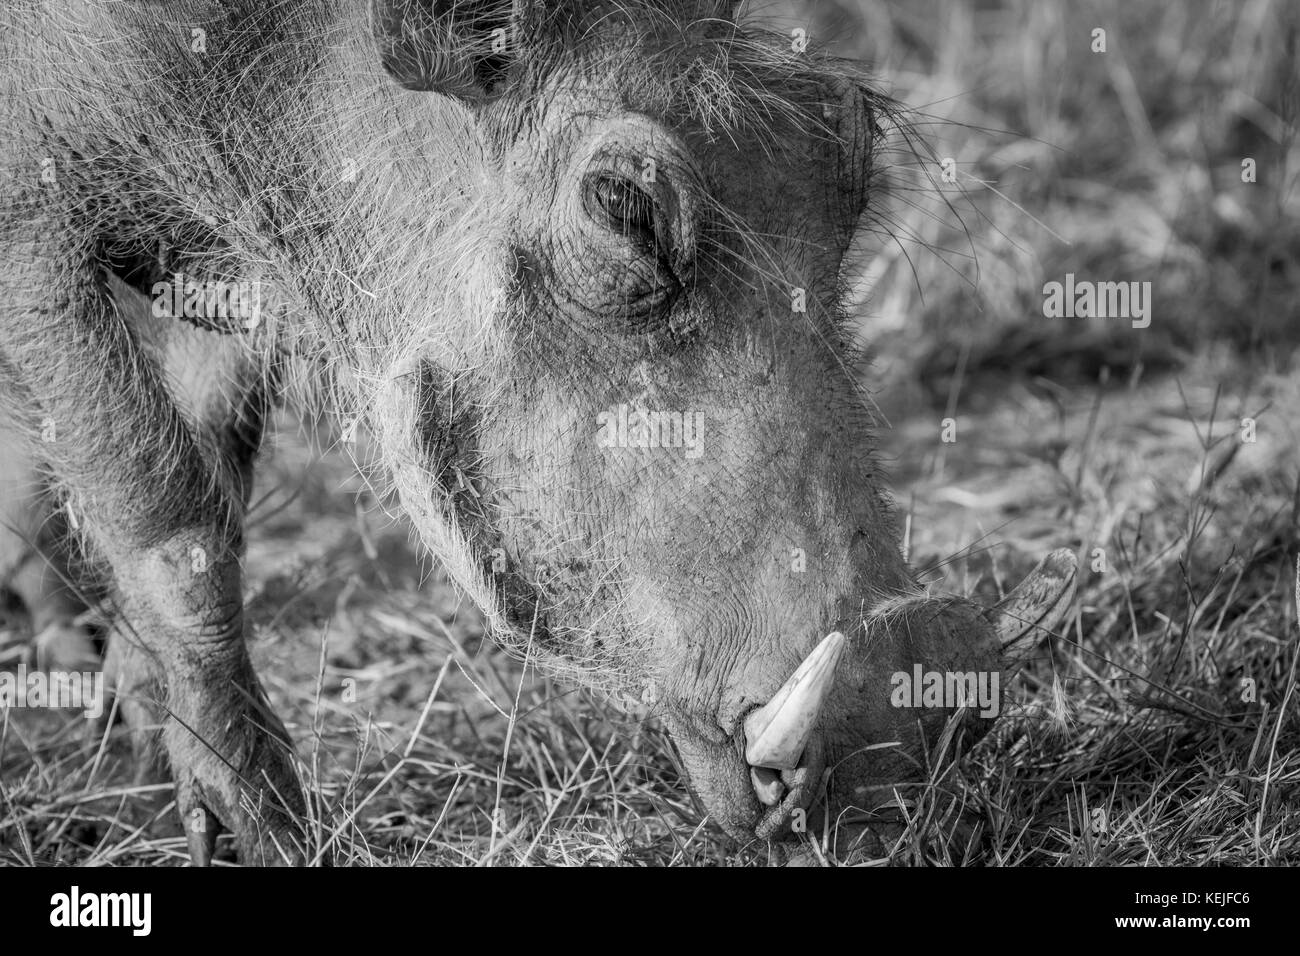 Close up of a Warthog eating in black and white in the Pilanesberg National Park, South Africa. Stock Photo